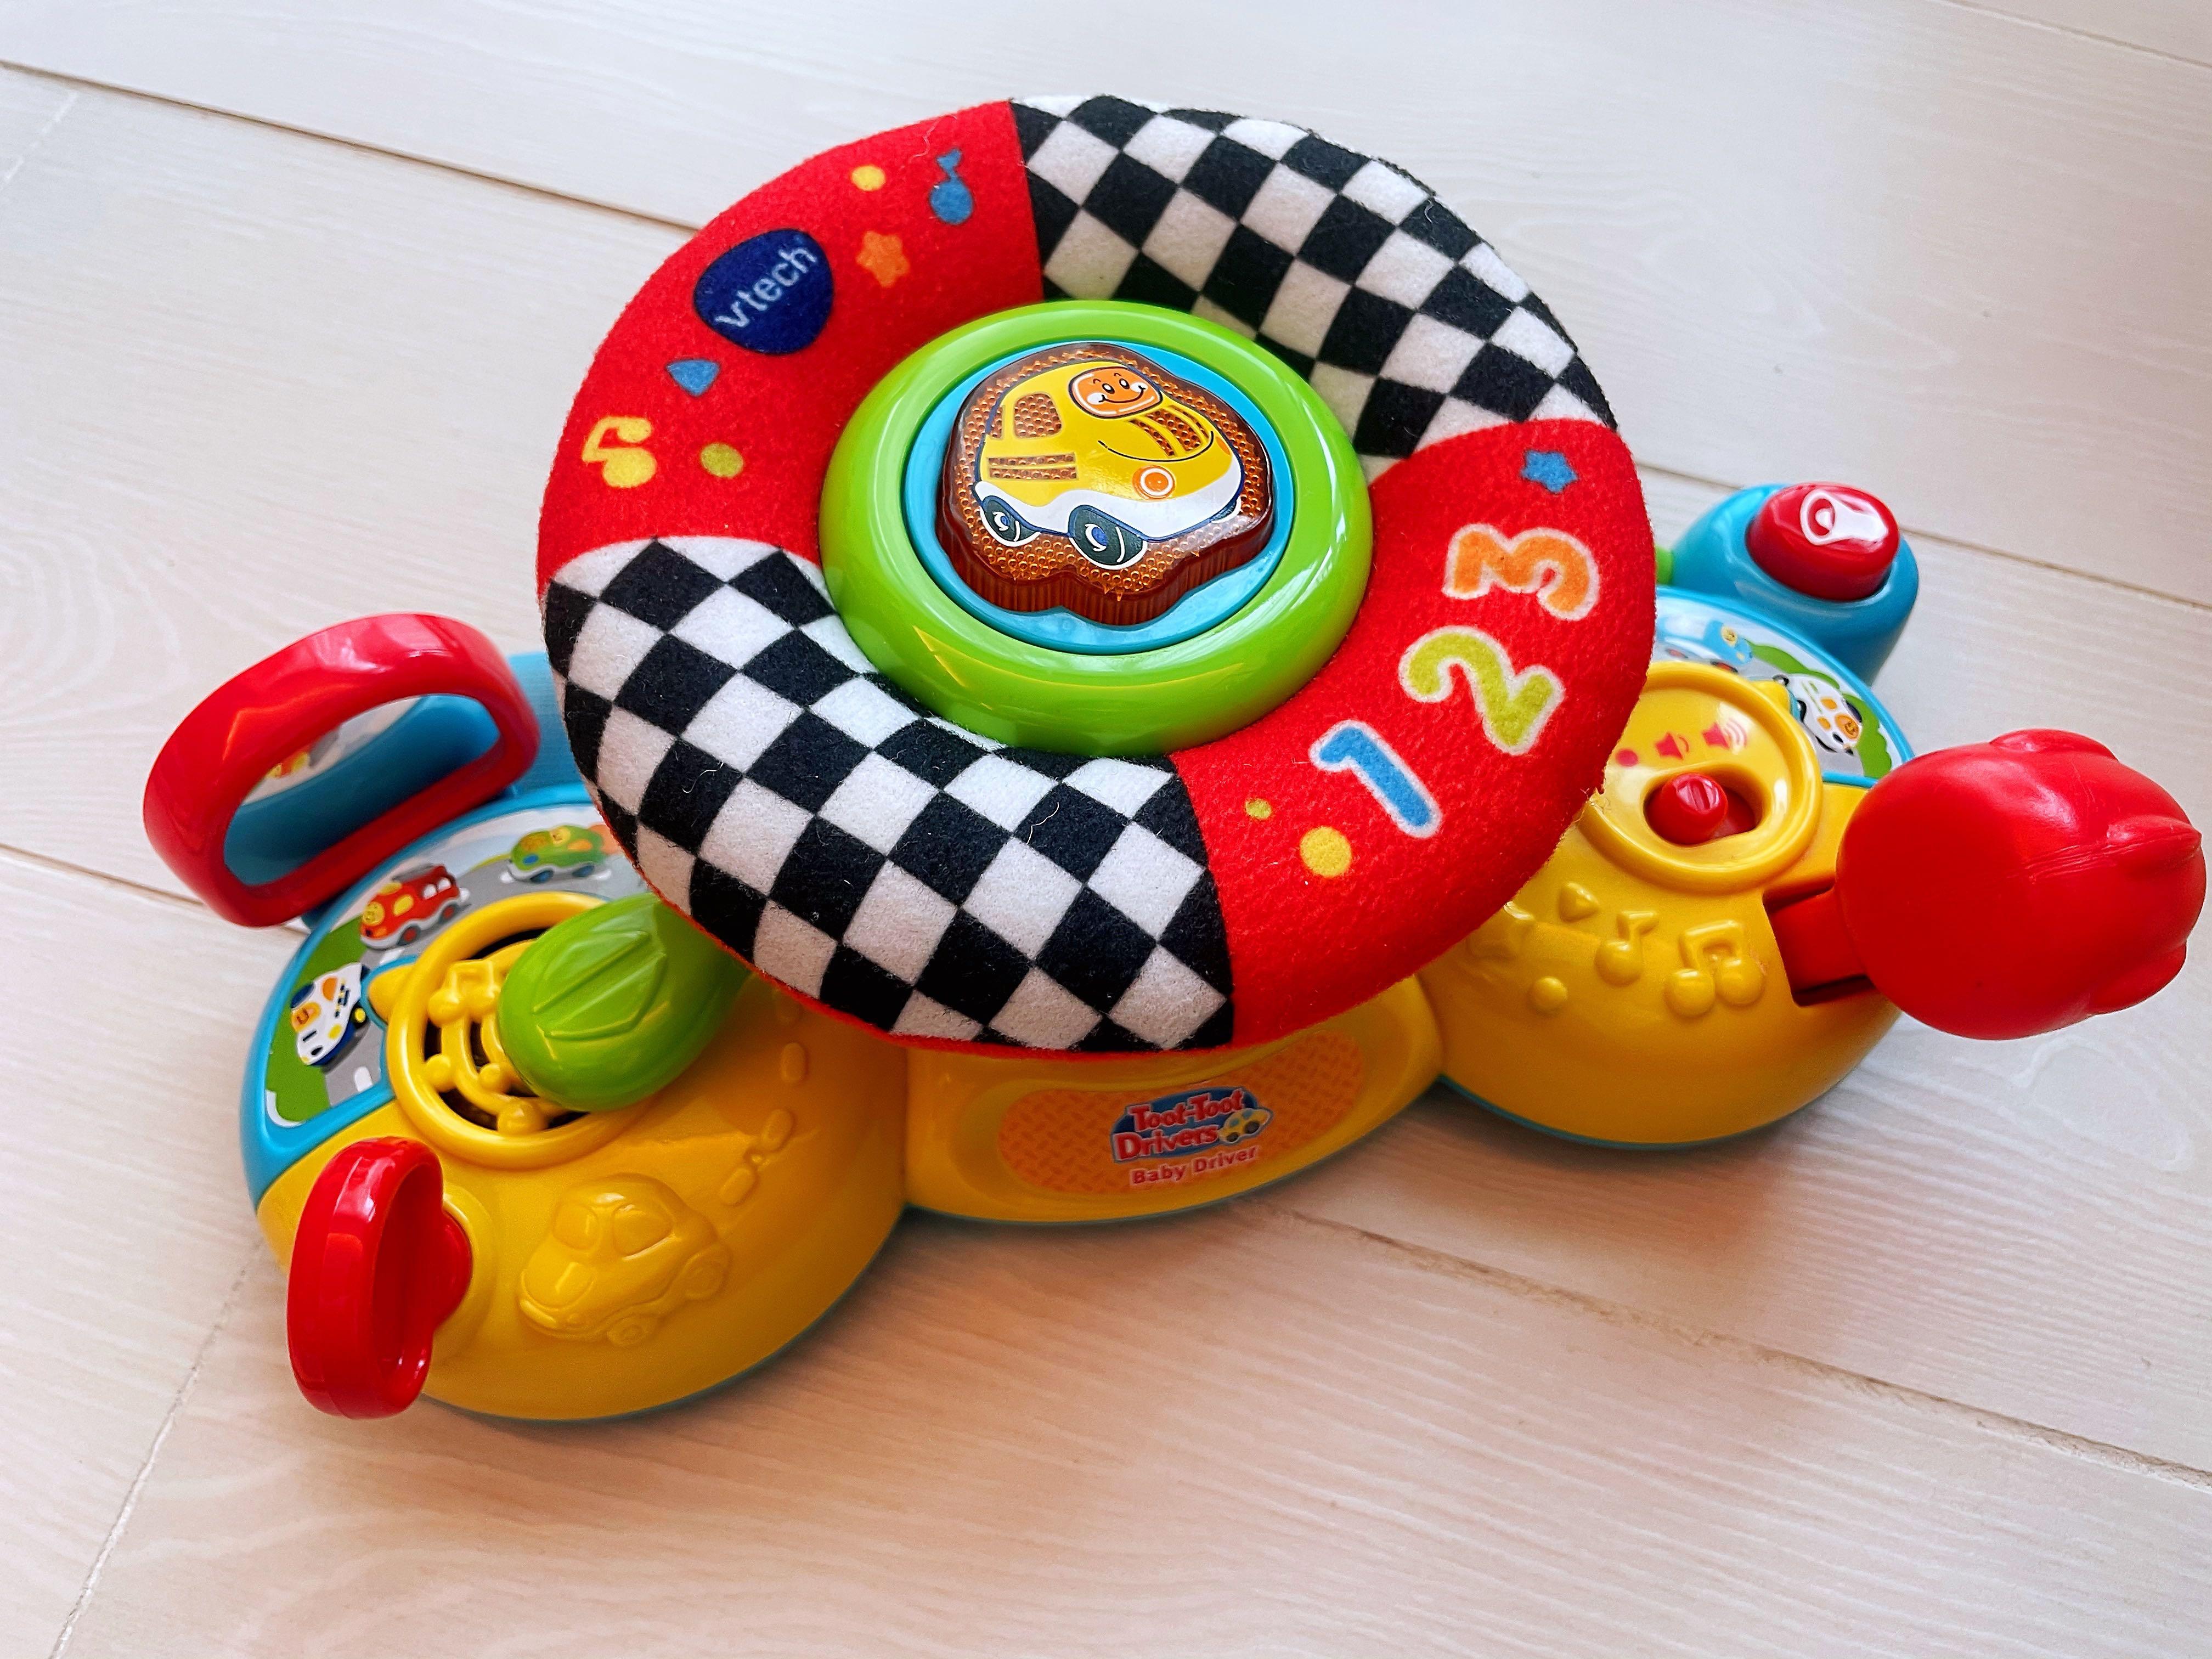 VTech Toot-Toot Drivers Baby Driver